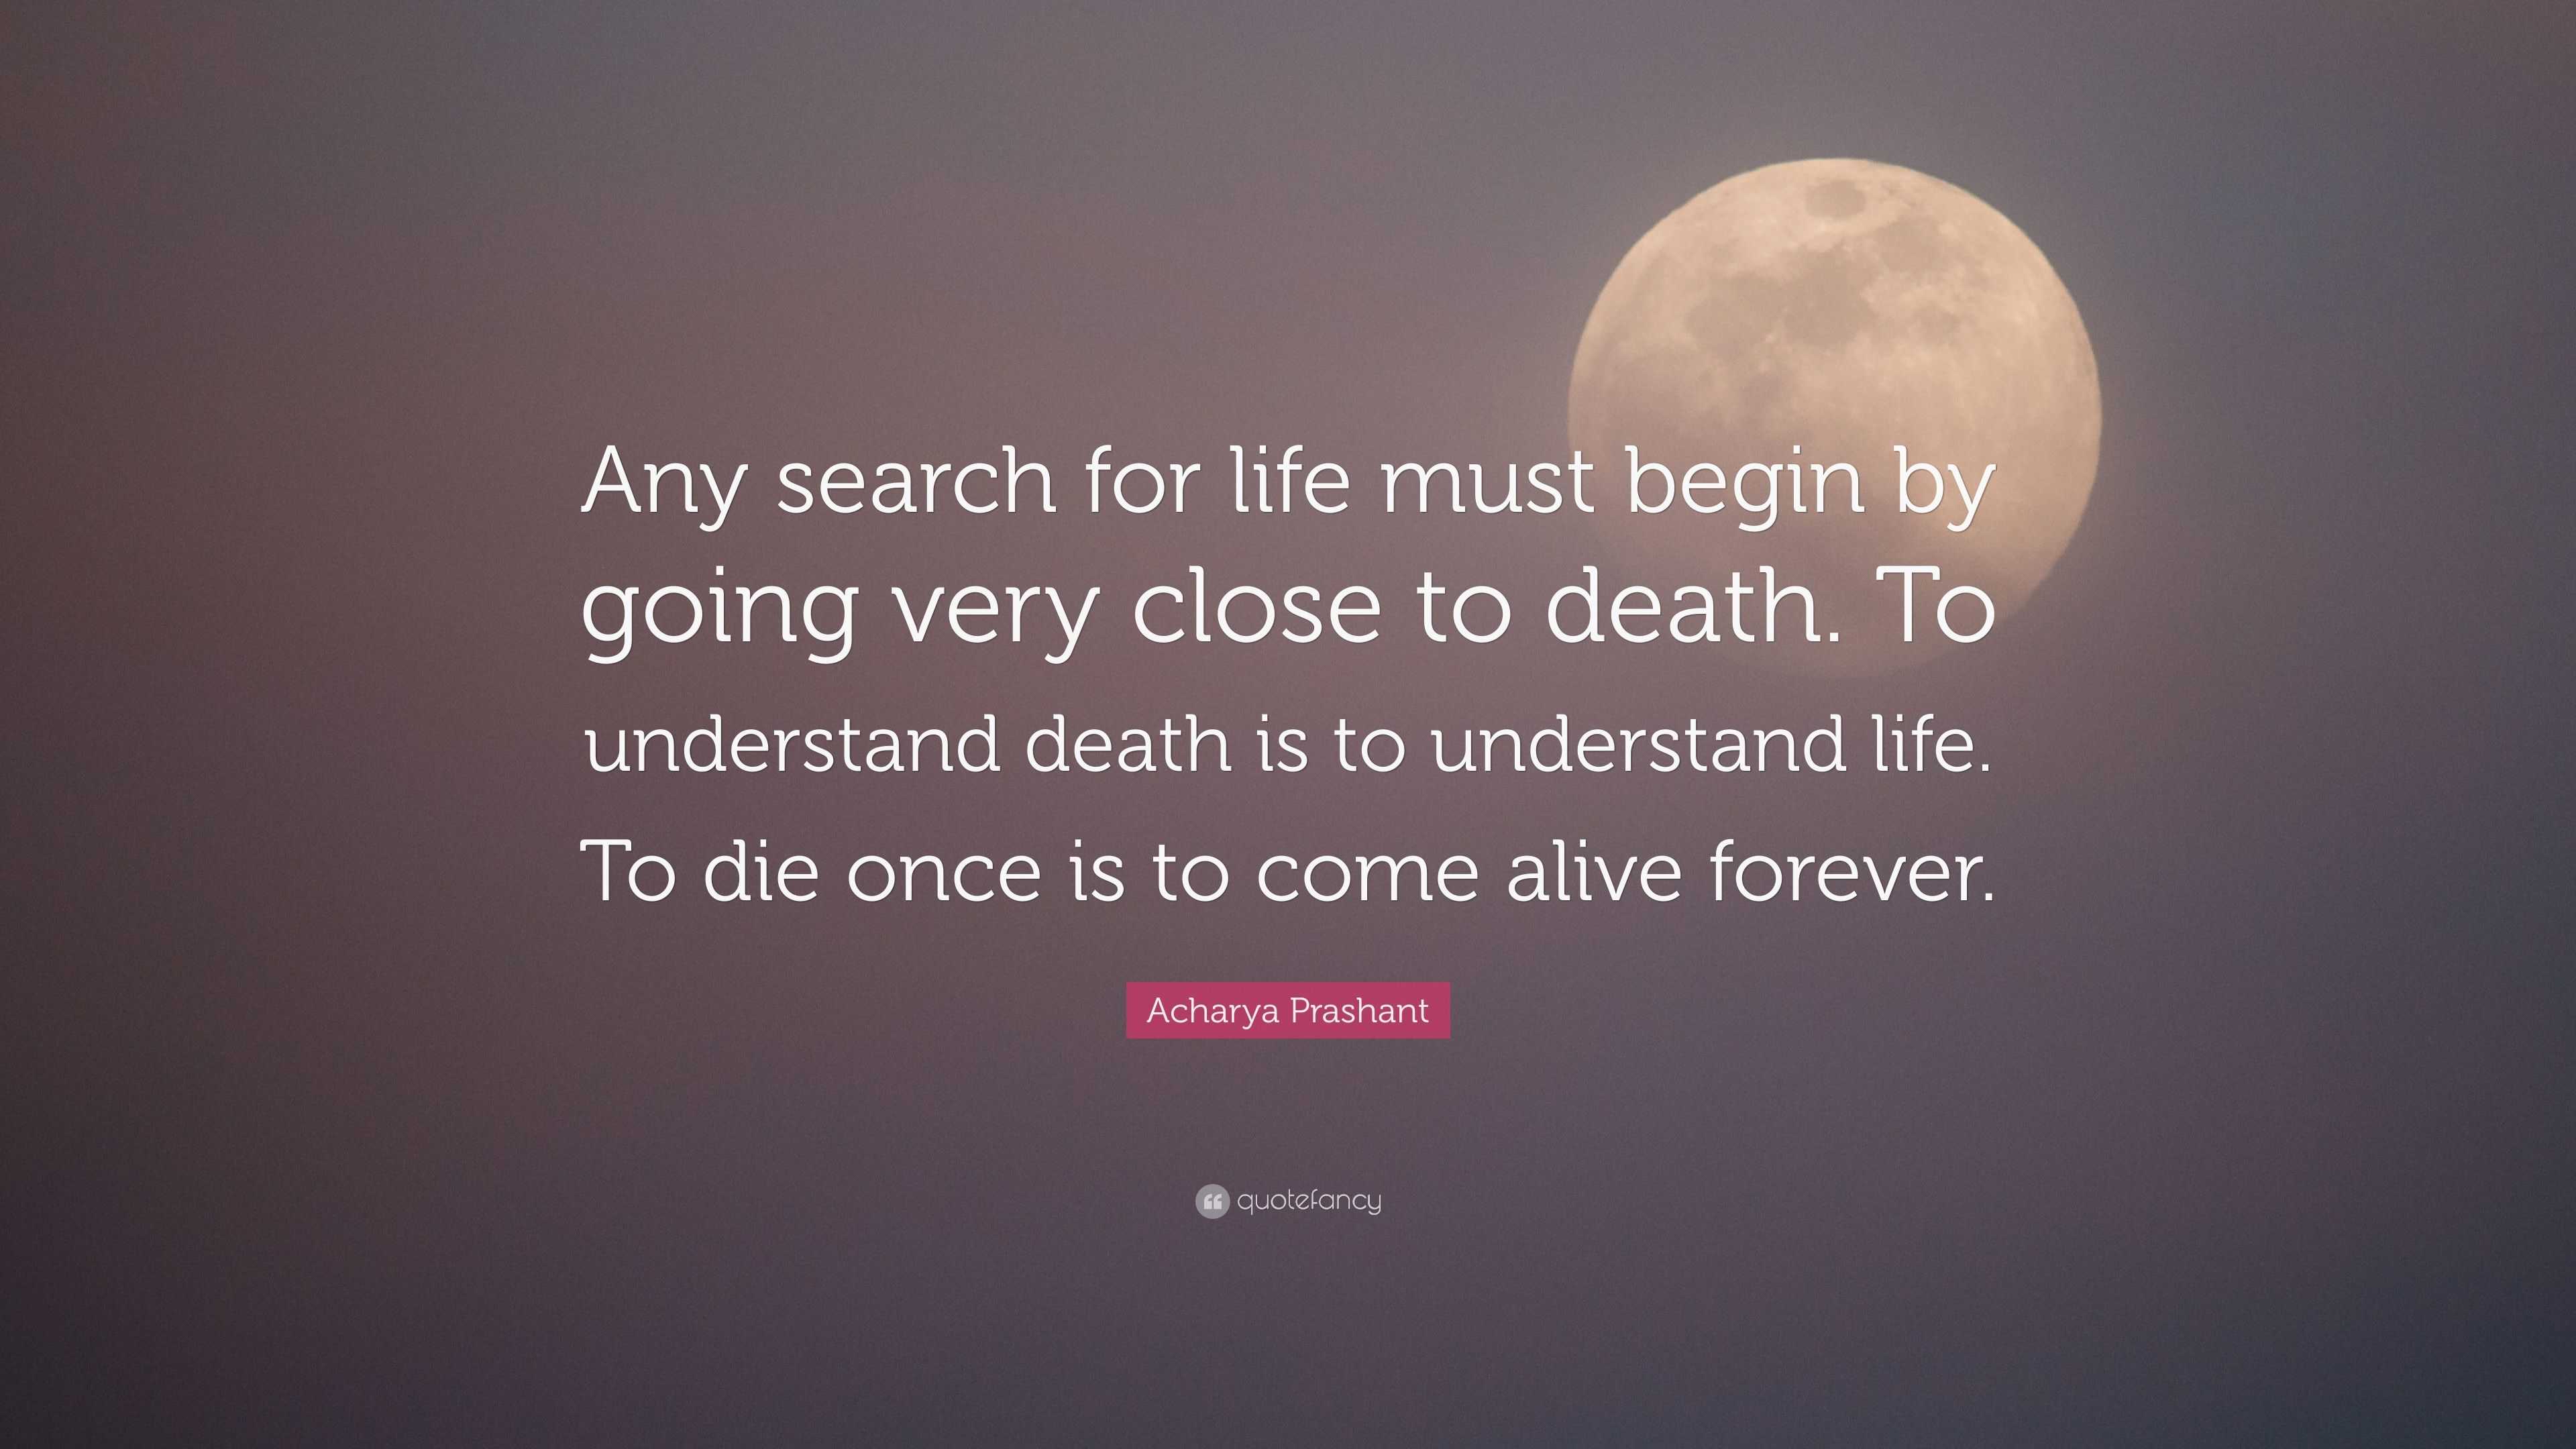 Acharya Prashant Quote: “Any search for life must begin by going very ...